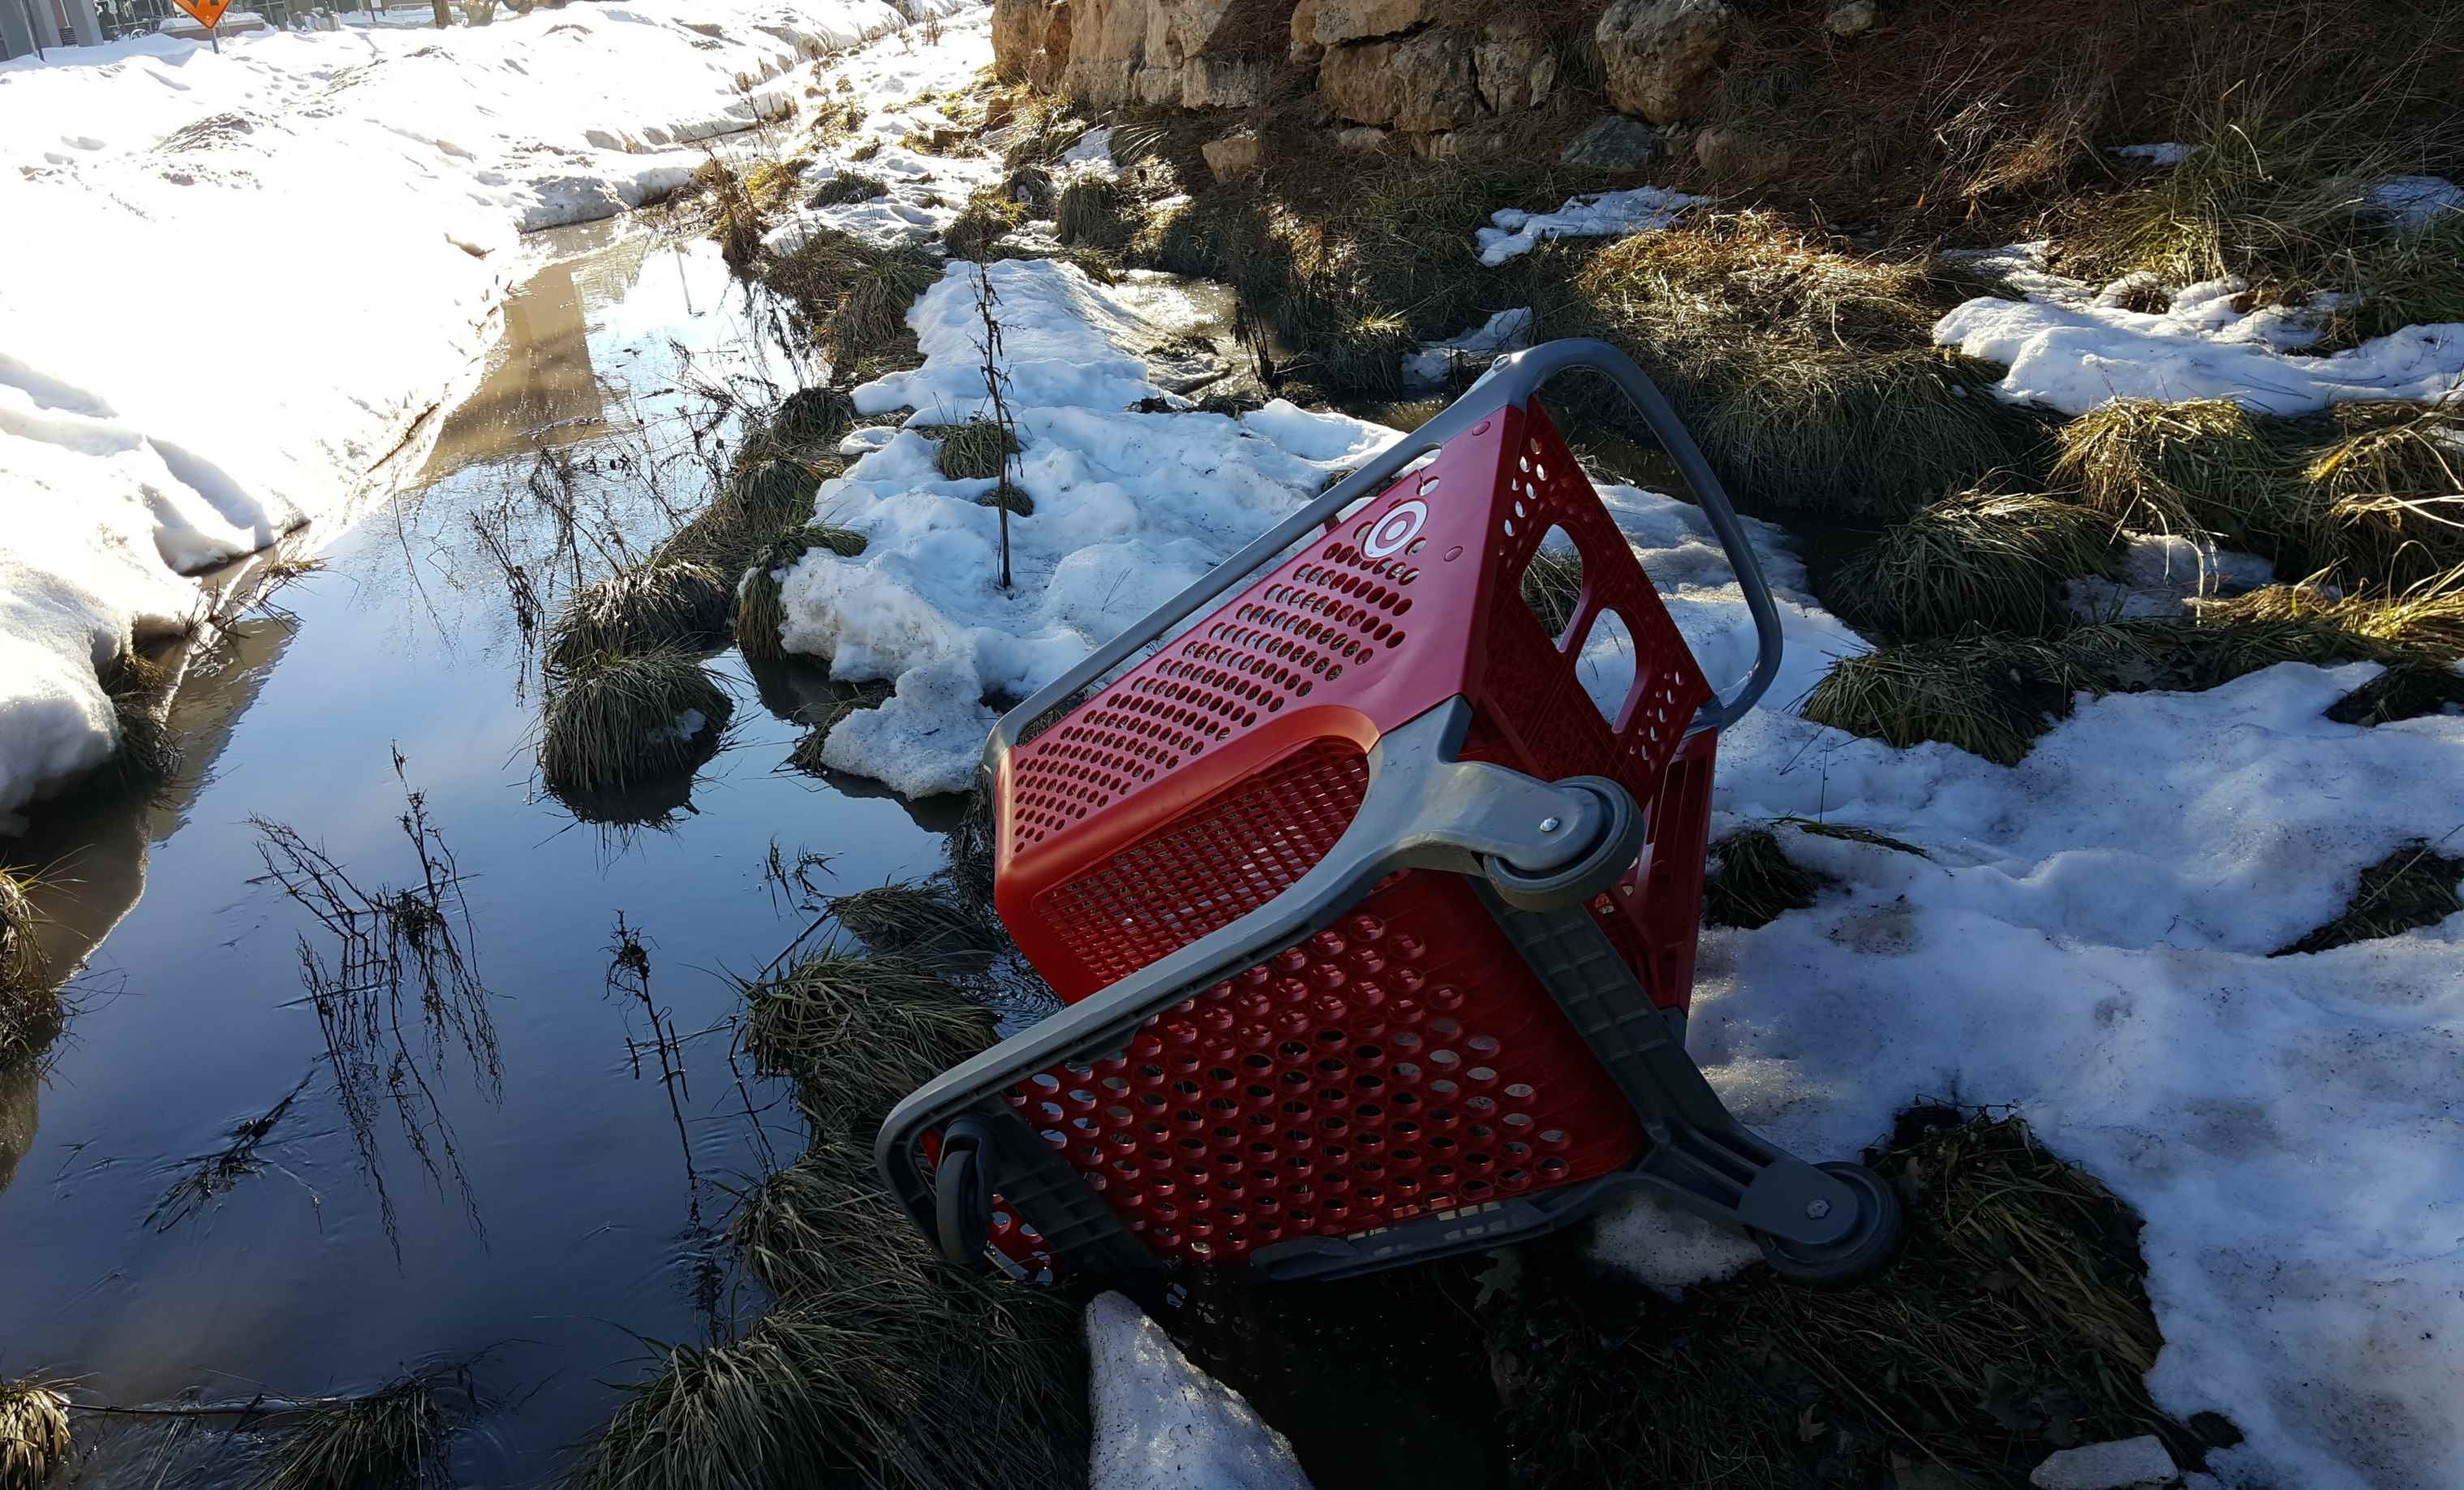 Image - Target Shopping Cart in Snowy Stream - Ped. Bridge near The Suites - Feb. 2017